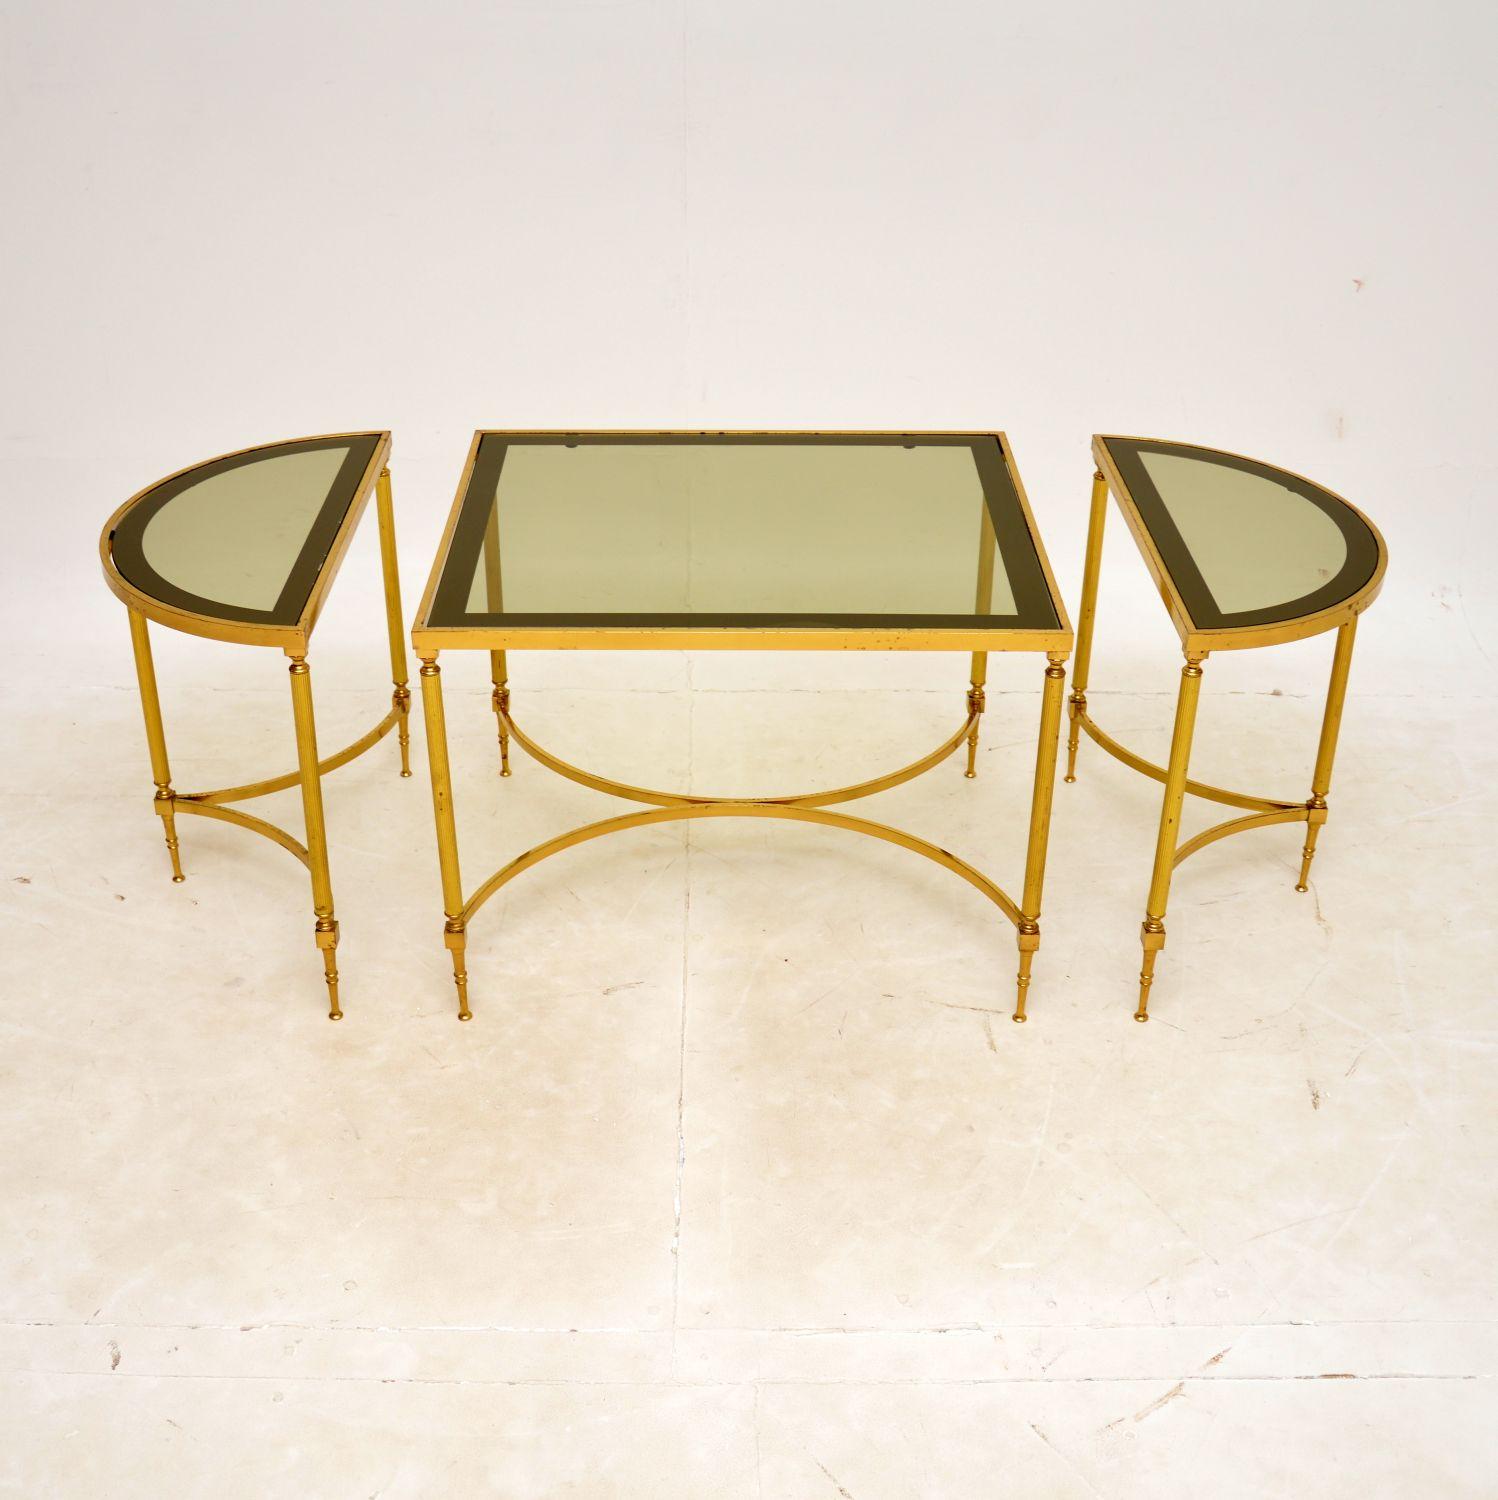 A superb vintage French brass and glass set of three tables / cofee table, dating from the 1970’s.

The quality is excellent and they are beautifully designed. This set consists of a larger rectangular centre table, with two smaller semi circular